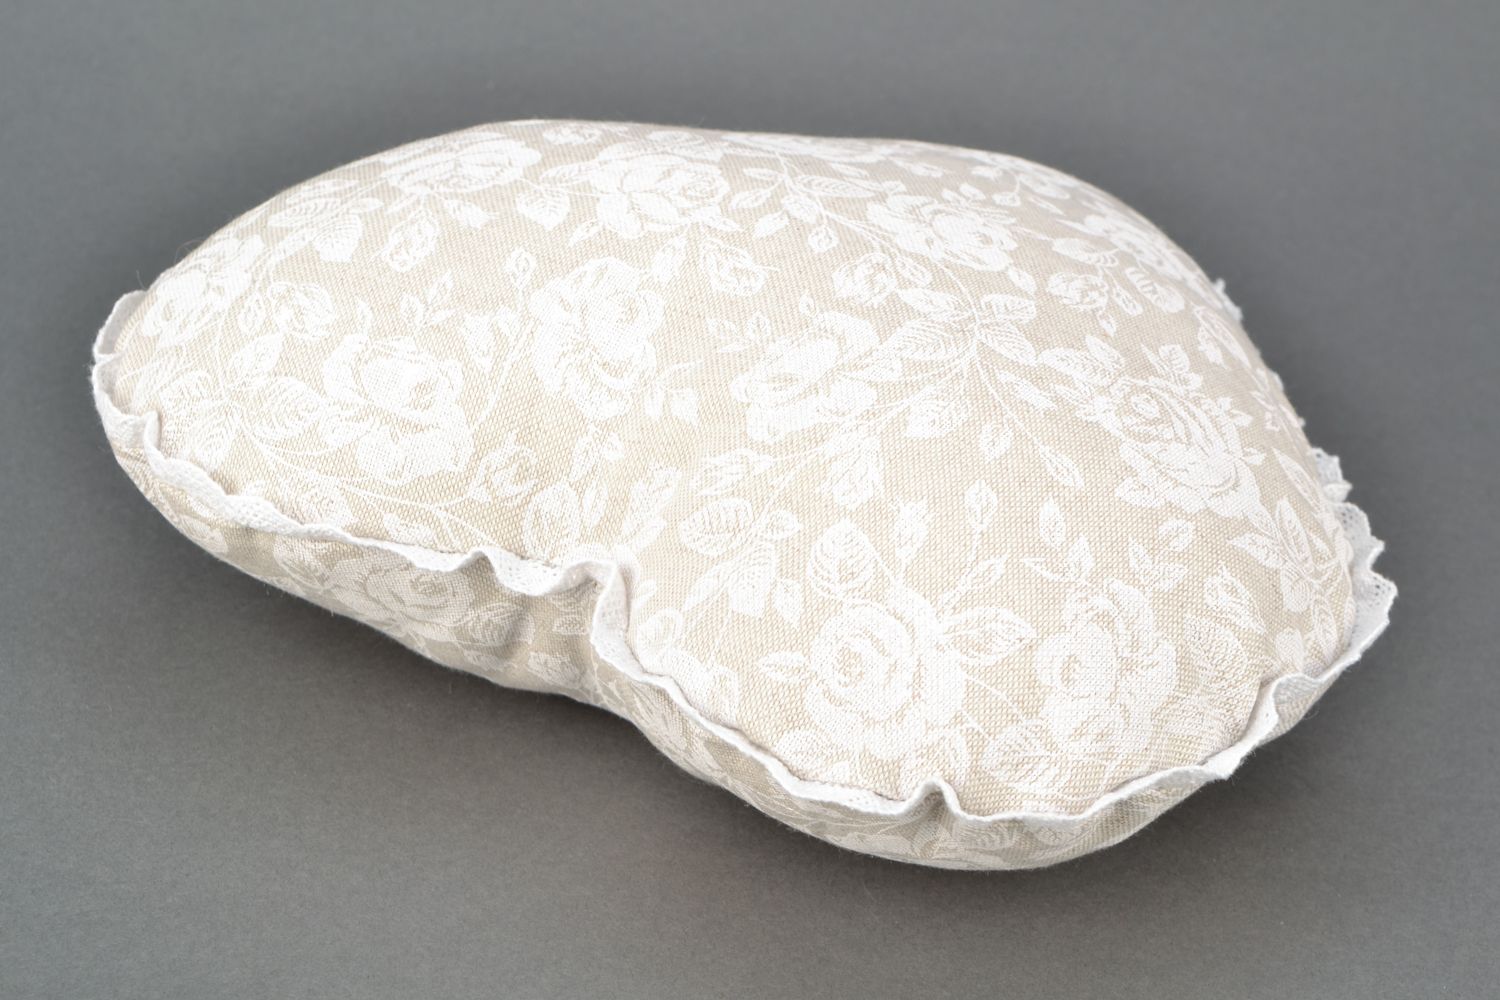 Heart-shaped decorative pillow made of fabric and lace White Rose photo 4